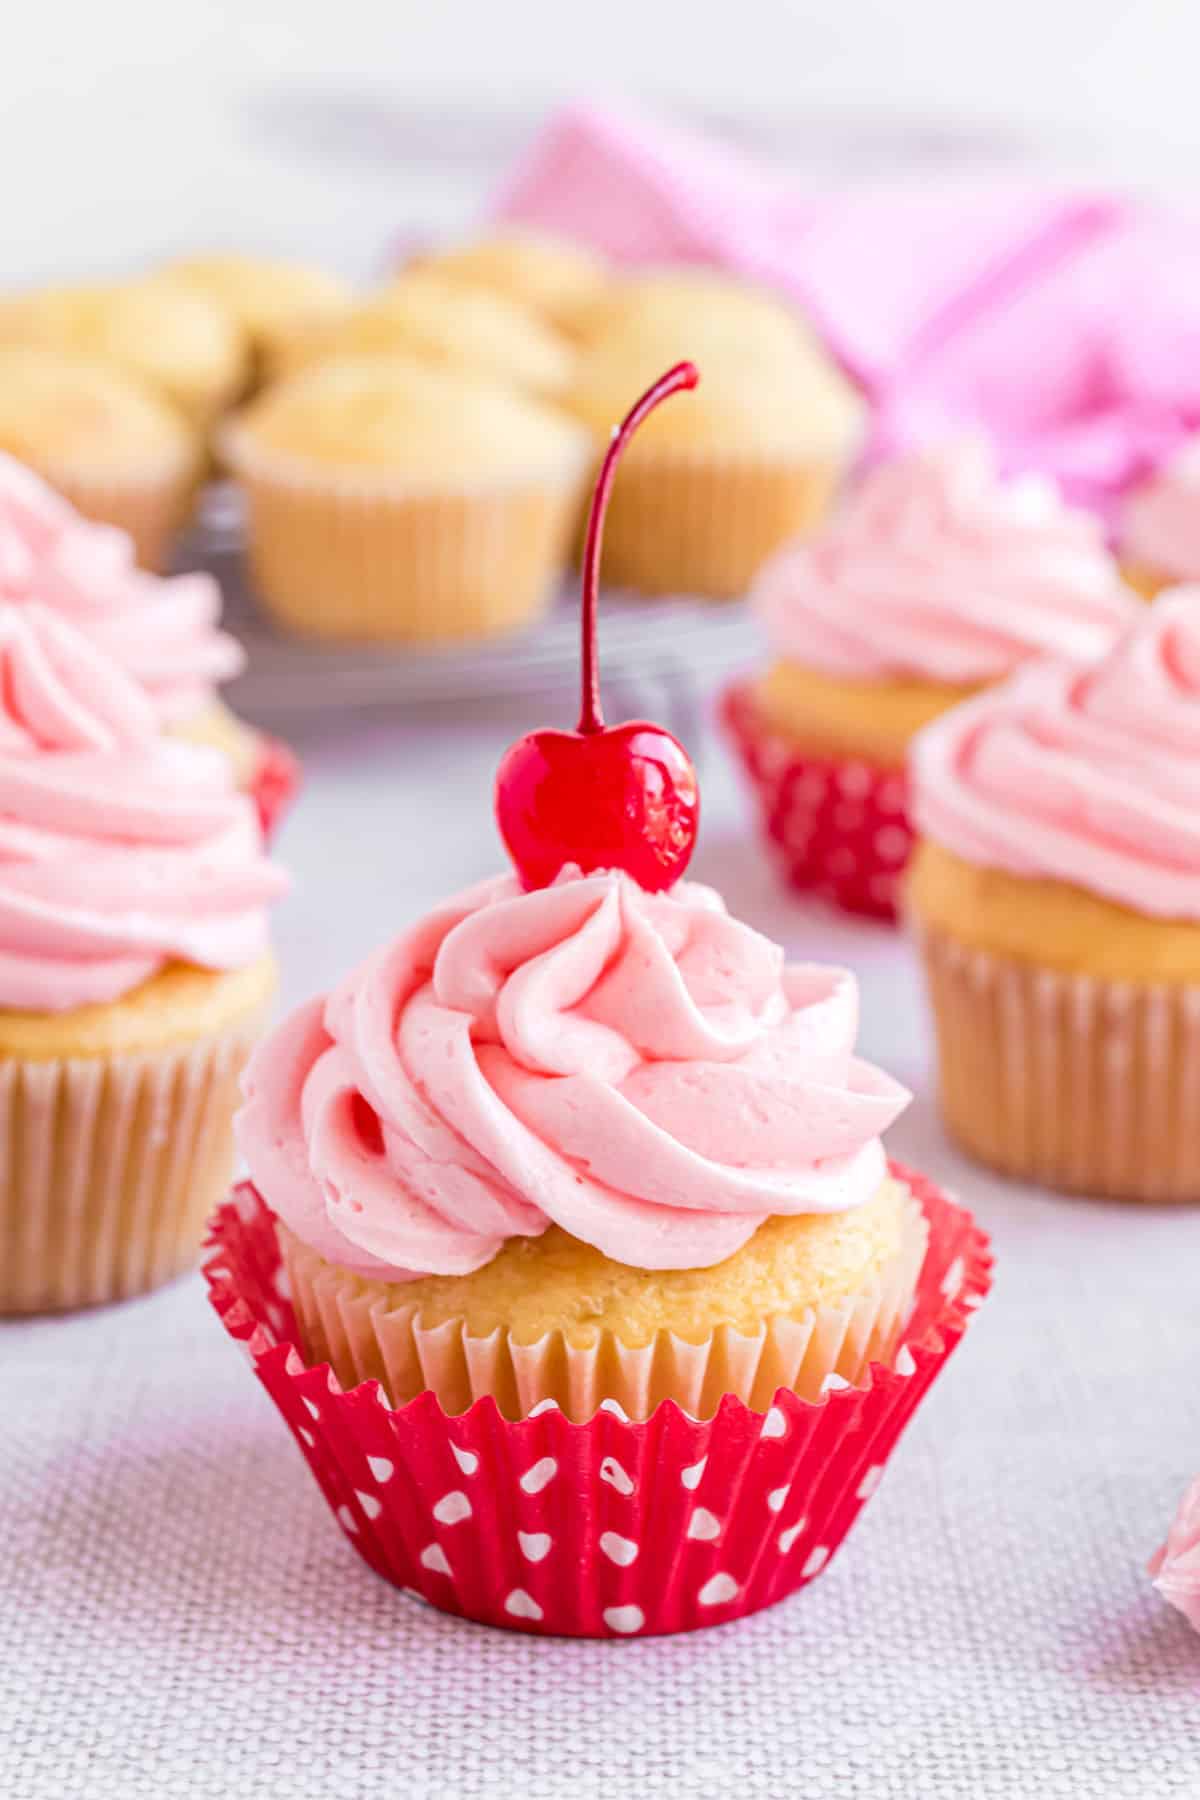 Almond cupcakes topped with cherry frosting and maraschino cherries.